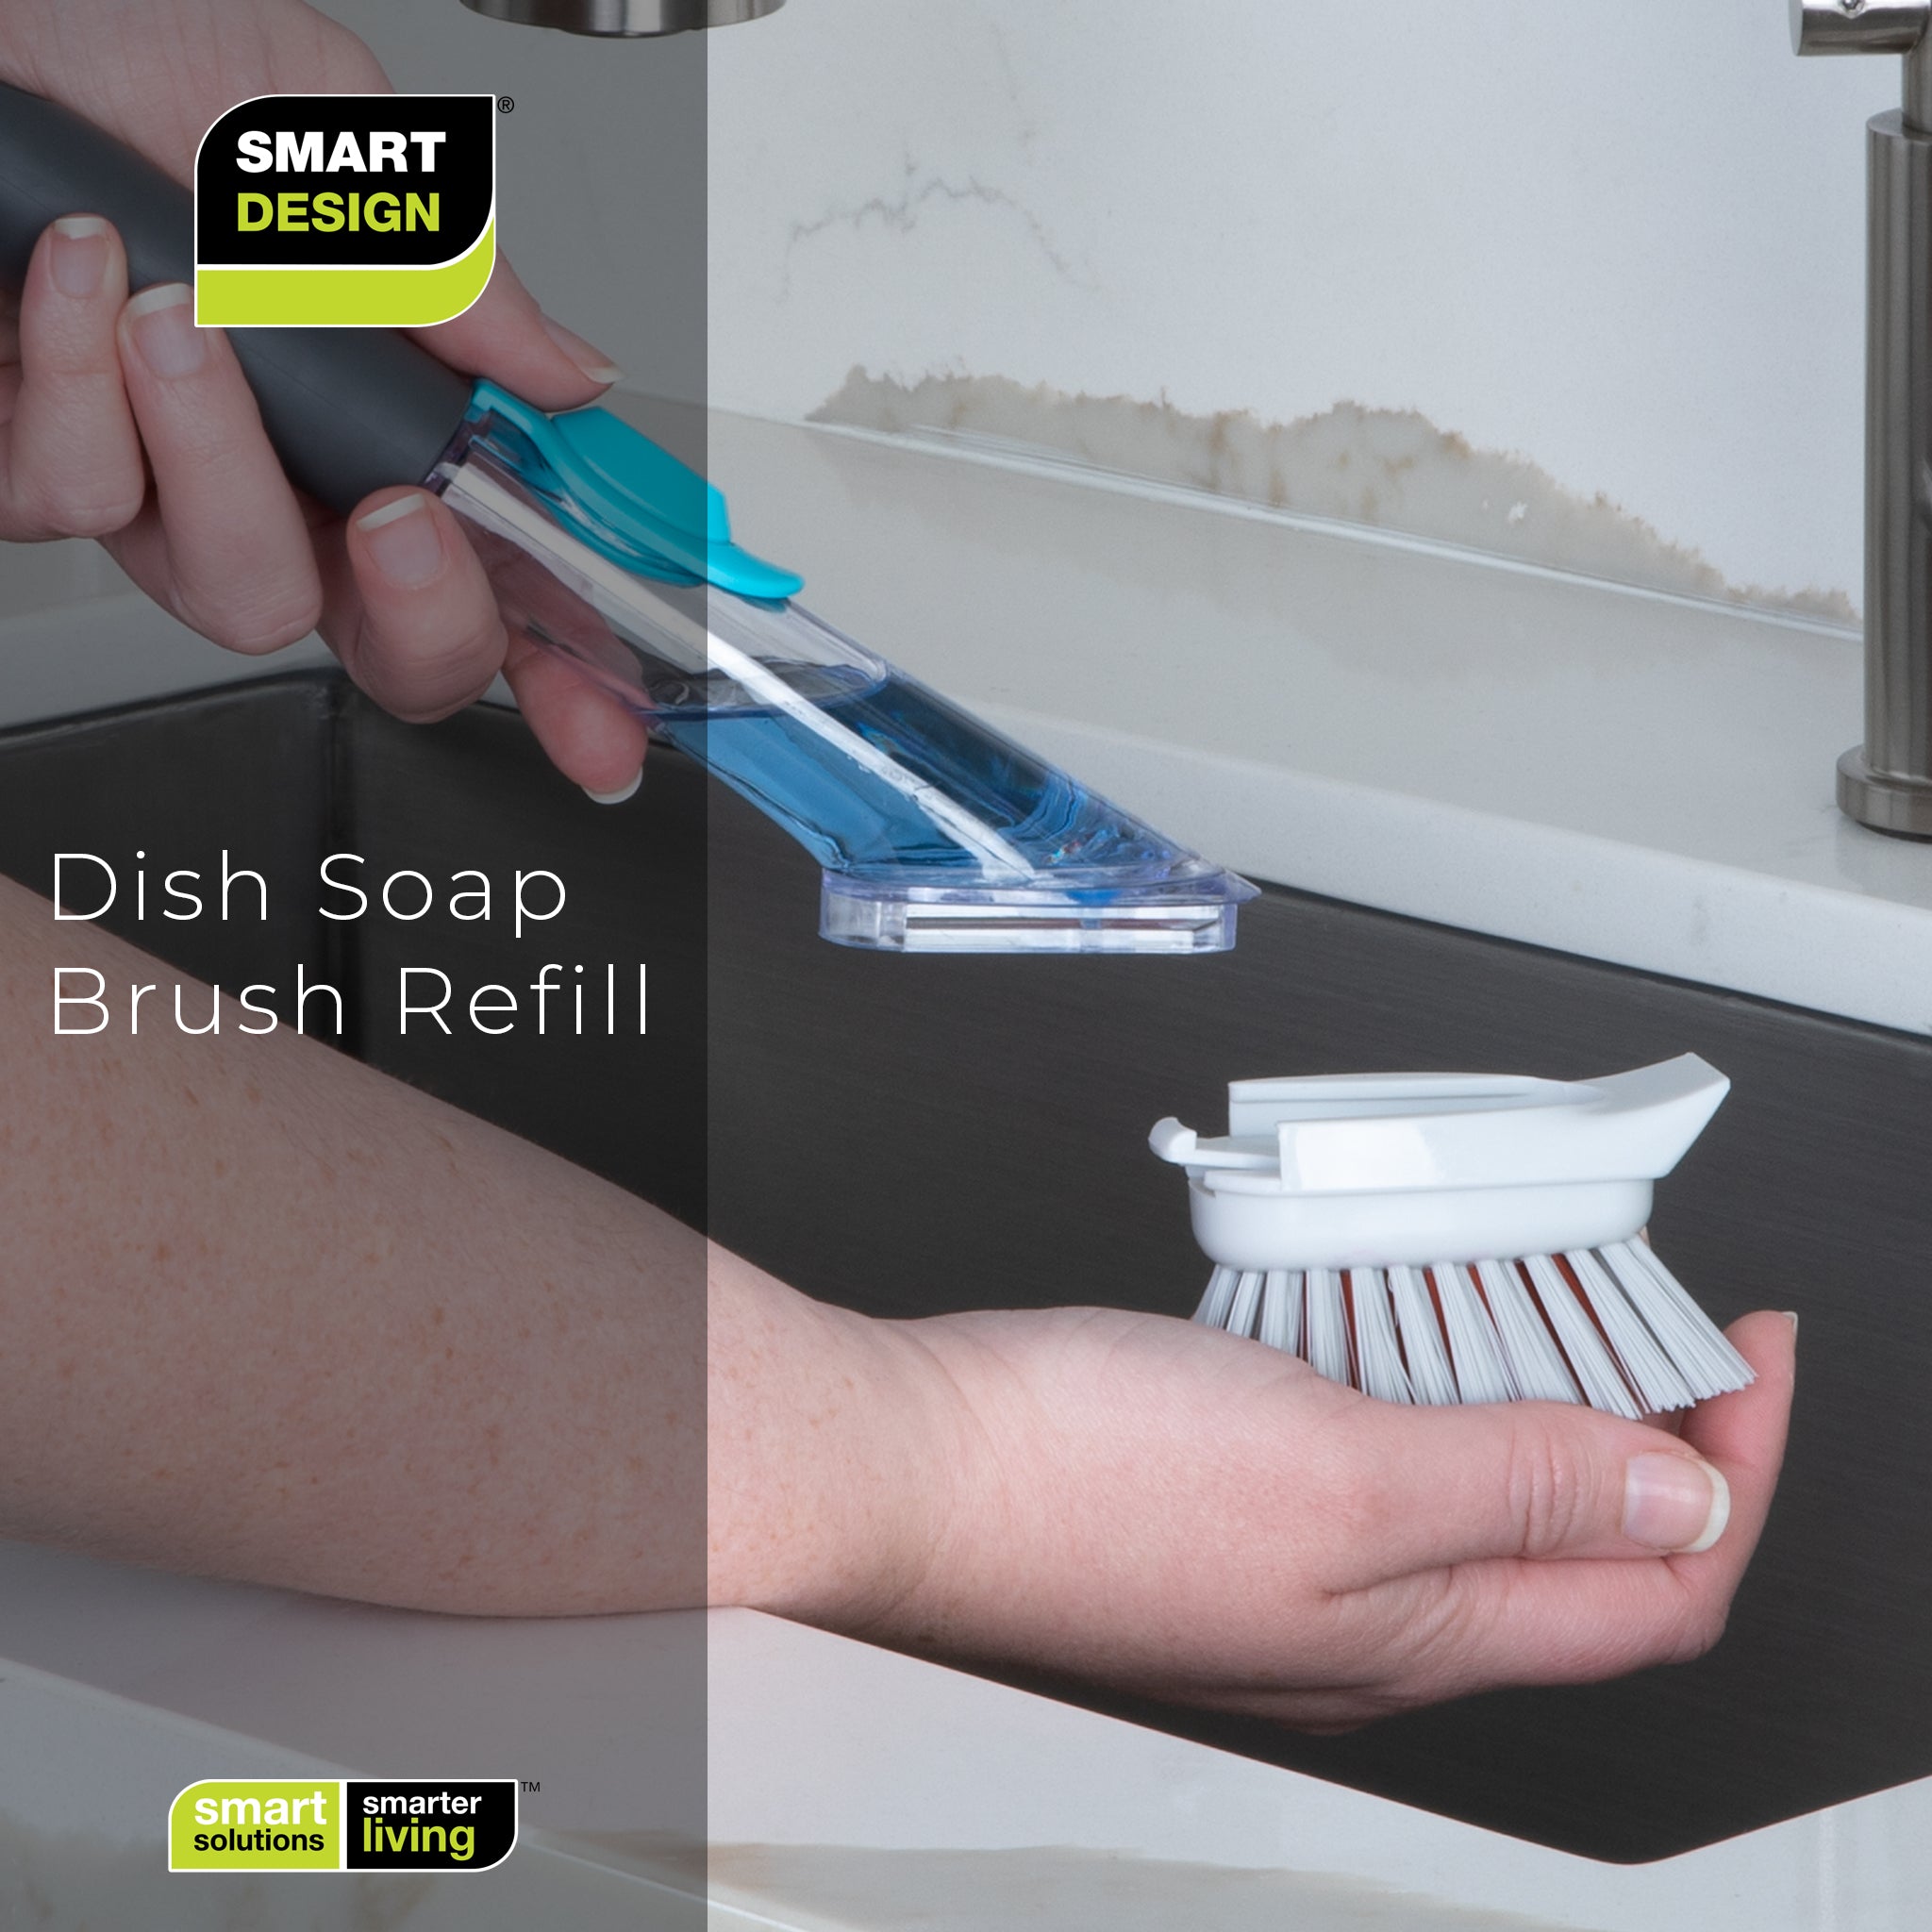 Smart Design Replacement Head for Non Scratch Soap Dispensing Dish Sponge - Set of 2 - Built-in Scraper - Odor Resistant - Dishwasher Safe - Cleaning